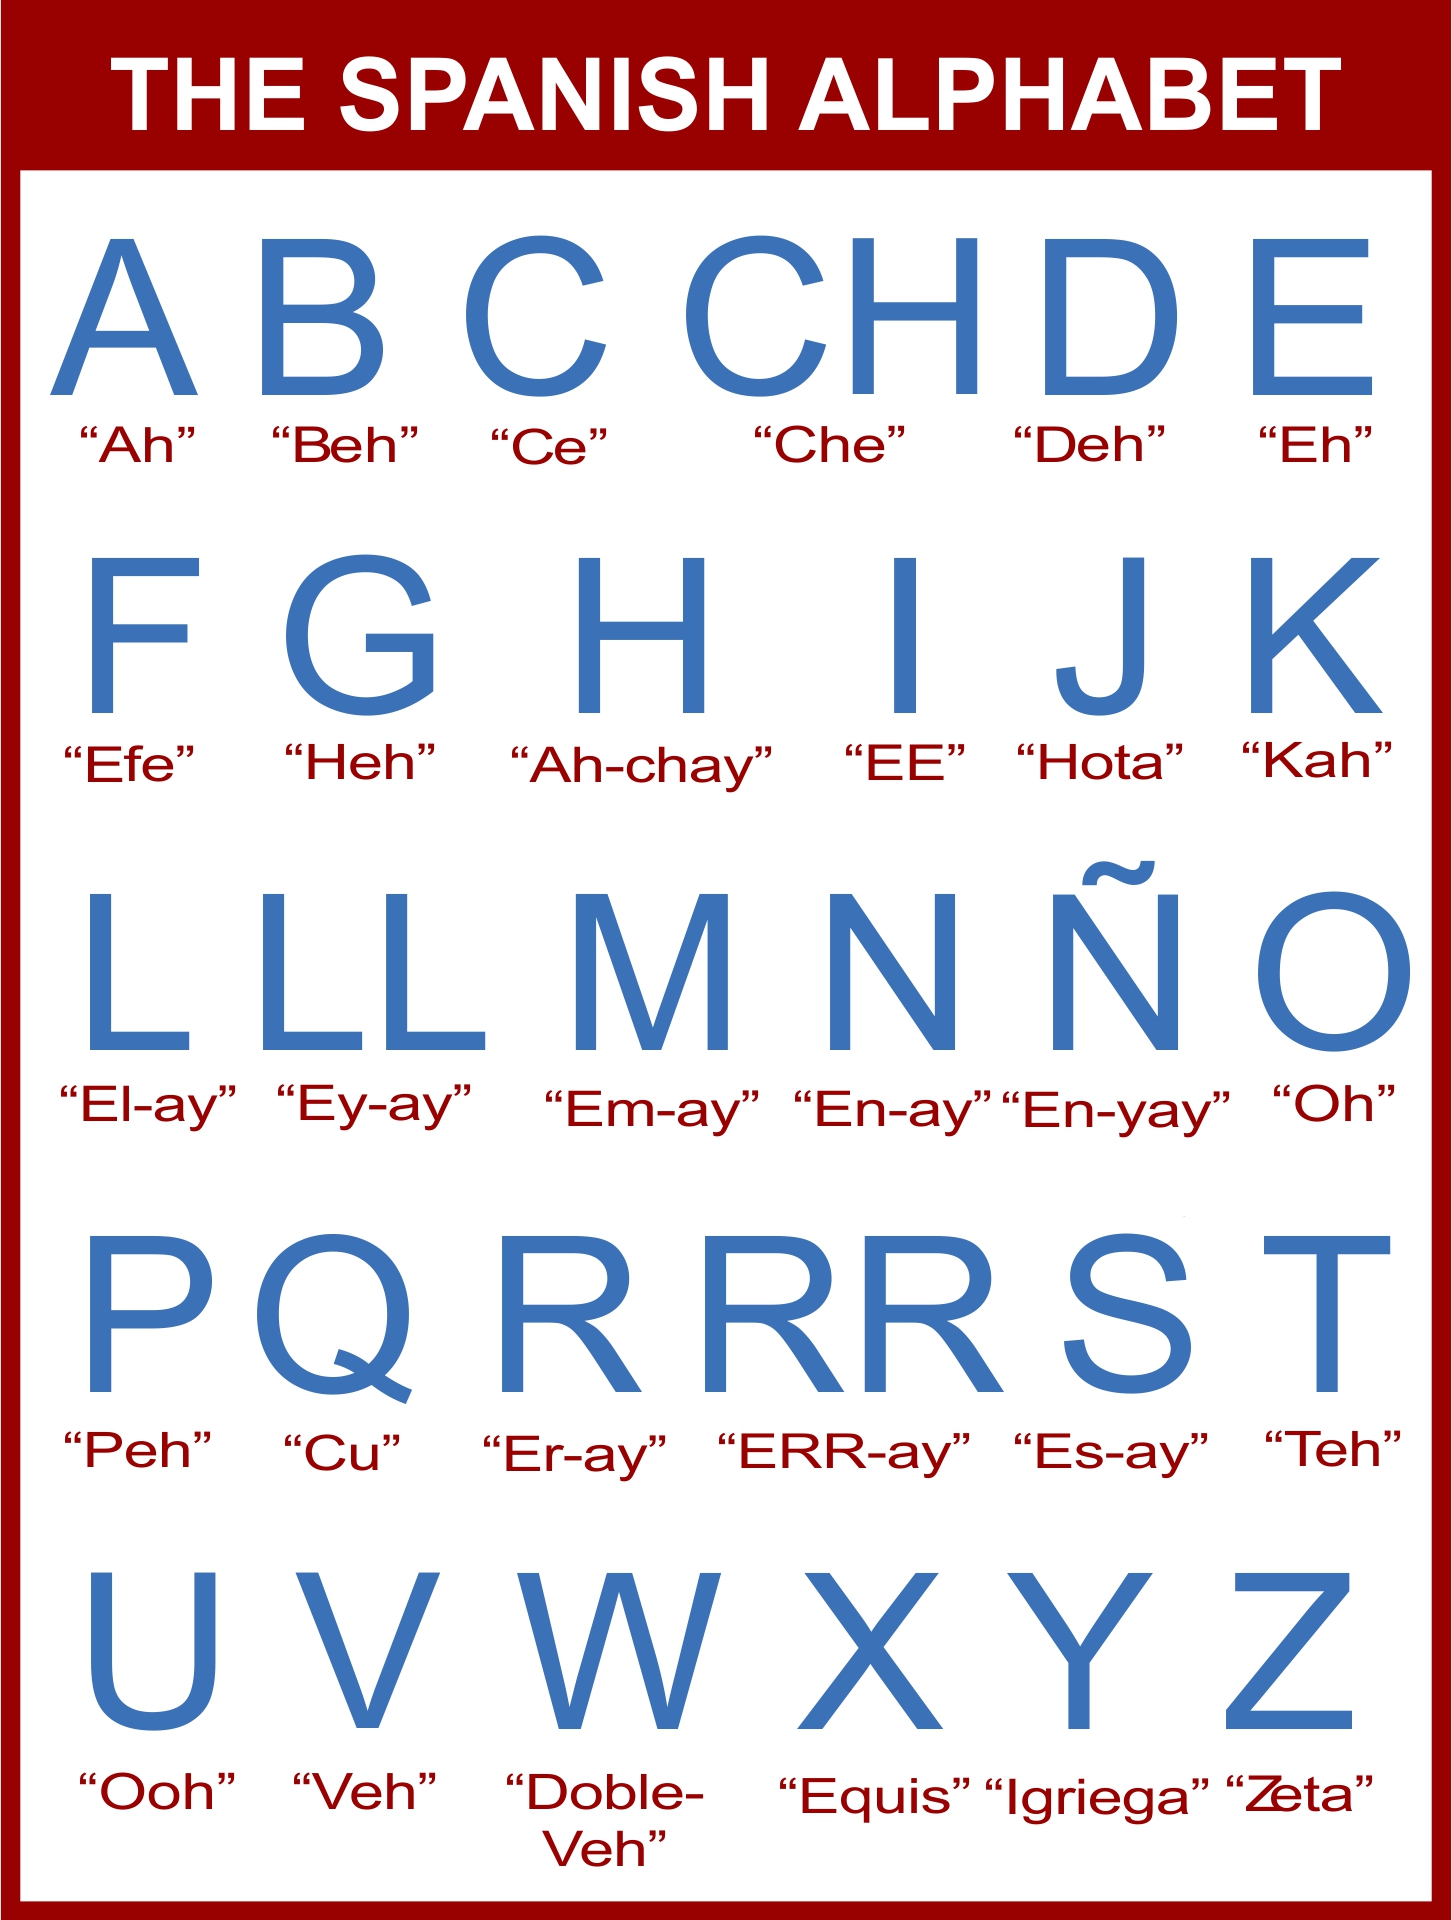 Alphabet Printable Images Gallery Category Page 1 - printablee.com